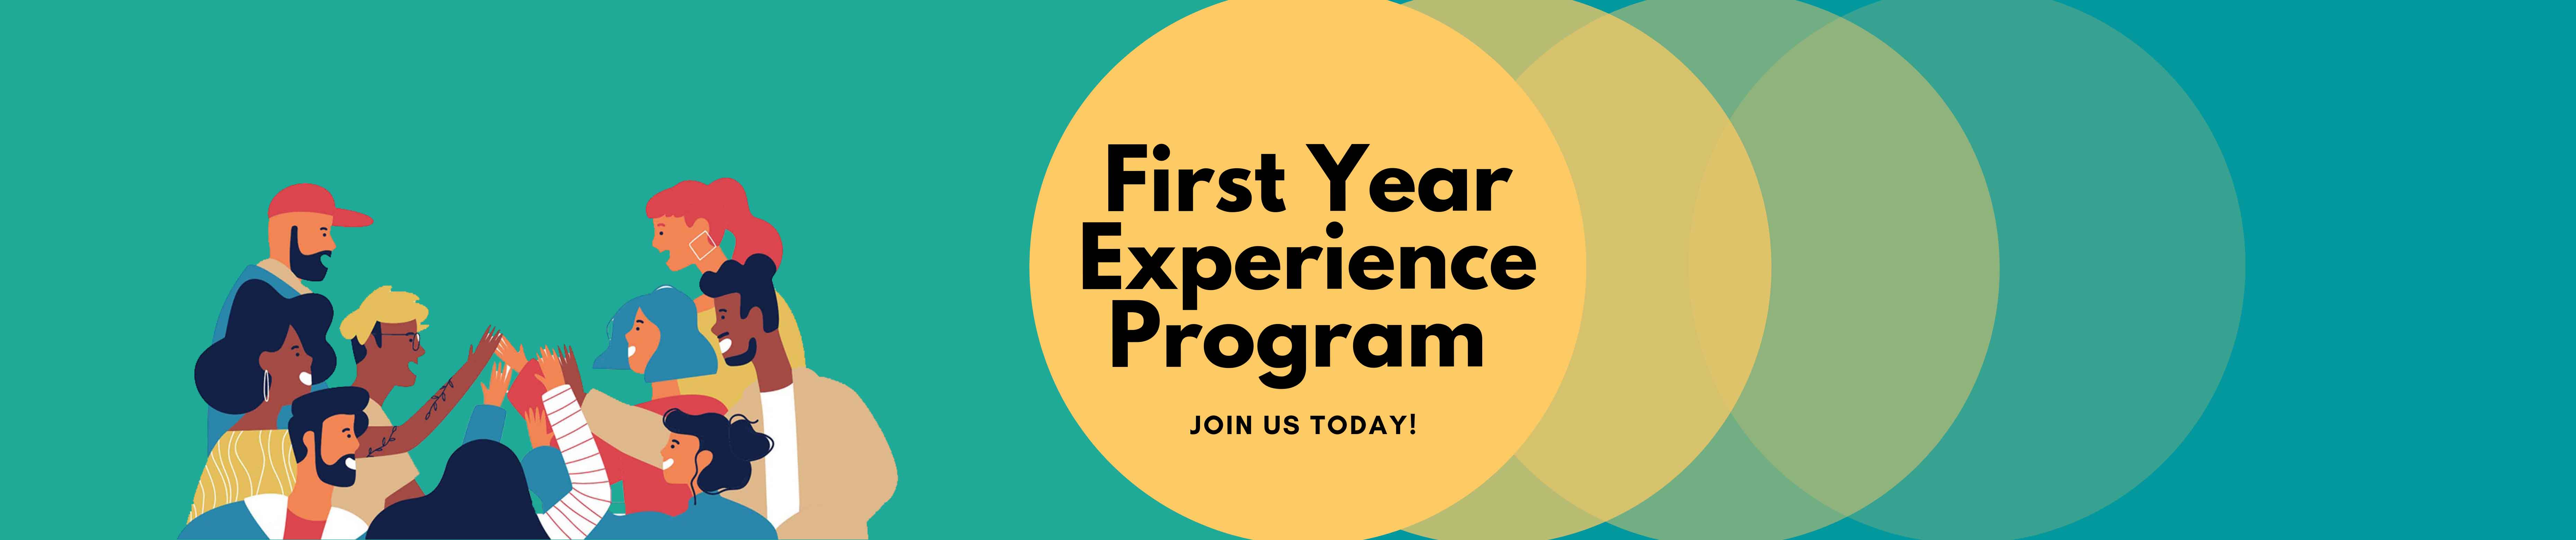 First Year Experience Program - Join us Today!